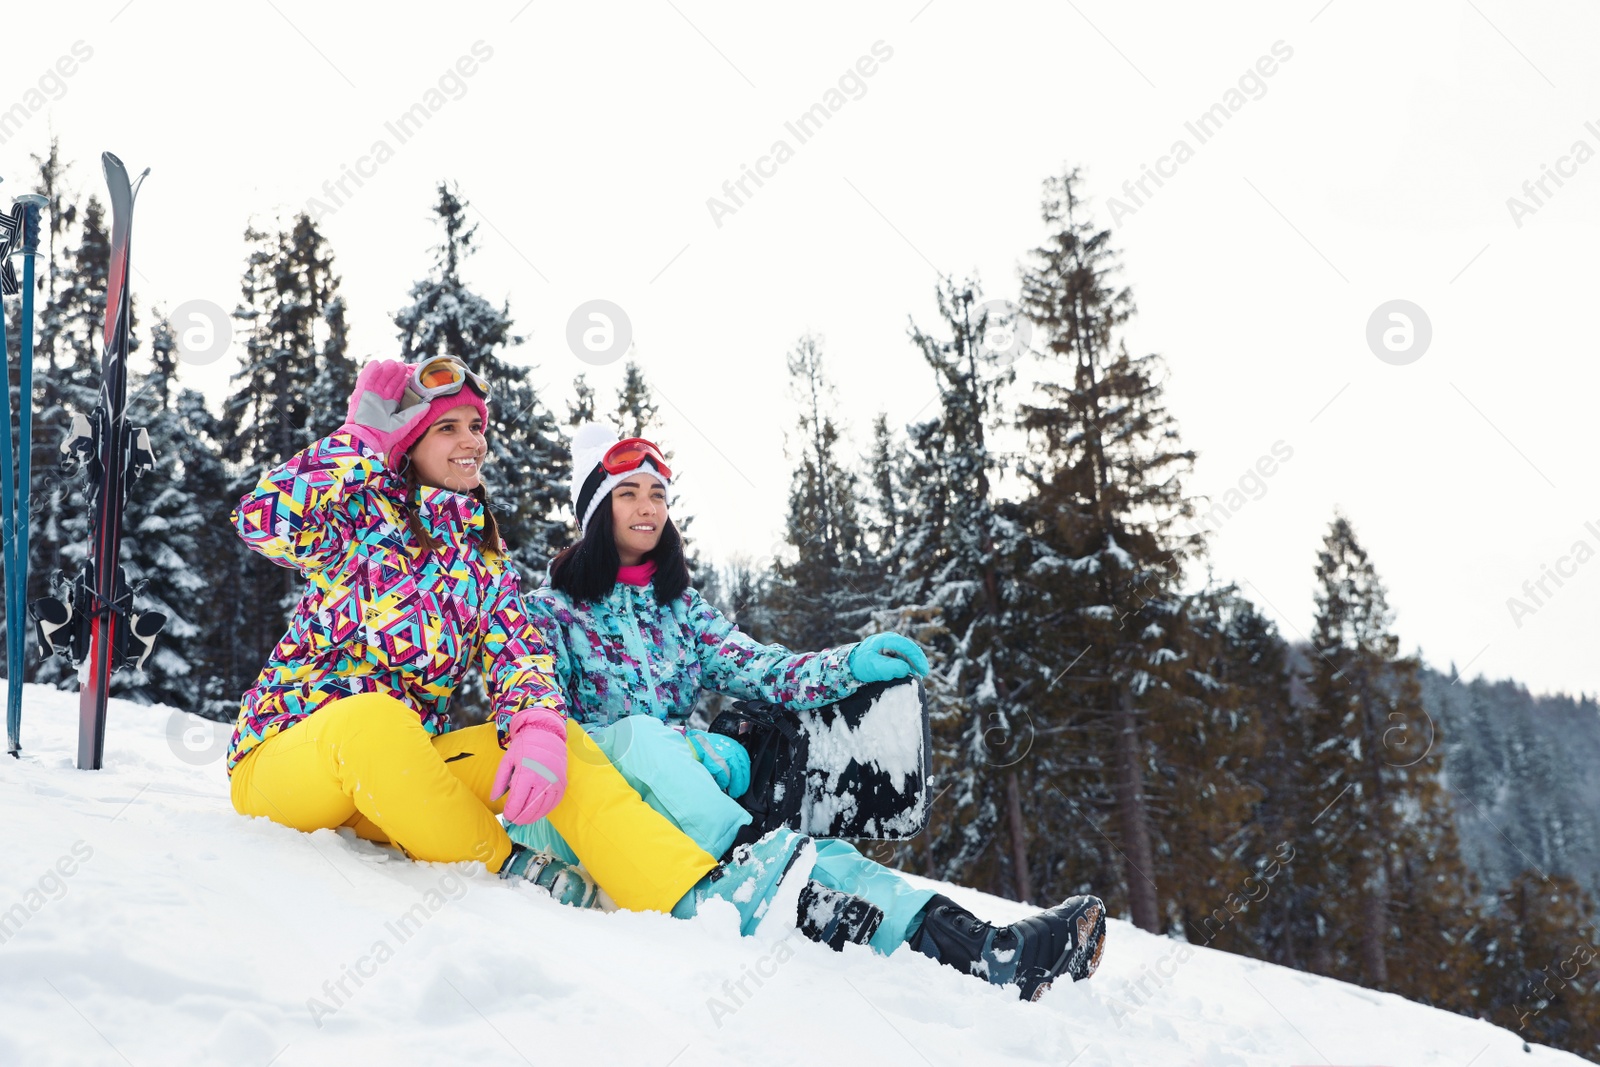 Photo of Friends with equipment on snowy hill. Winter vacation